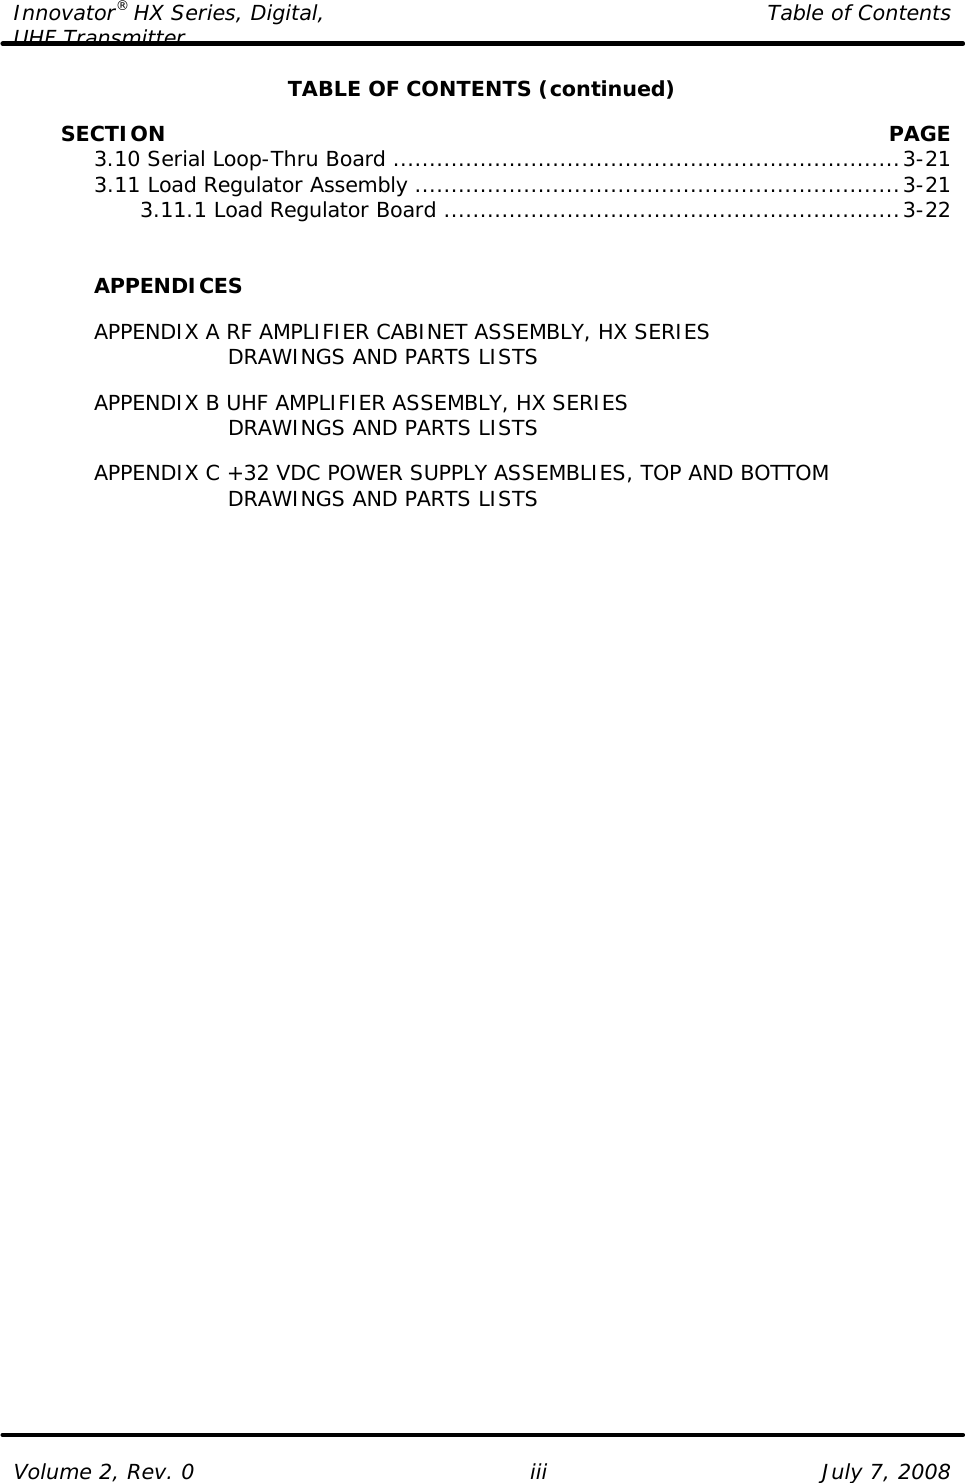 Innovator® HX Series, Digital, Table of Contents UHF Transmitter  Volume 2, Rev. 0 iii July 7, 2008 TABLE OF CONTENTS (continued)           SECTION    PAGE  3.10 Serial Loop-Thru Board......................................................................3-21  3.11 Load Regulator Assembly ...................................................................3-21     3.11.1 Load Regulator Board ...............................................................3-22    APPENDICES   APPENDIX A RF AMPLIFIER CABINET ASSEMBLY, HX SERIES           DRAWINGS AND PARTS LISTS   APPENDIX B UHF AMPLIFIER ASSEMBLY, HX SERIES           DRAWINGS AND PARTS LISTS   APPENDIX C +32 VDC POWER SUPPLY ASSEMBLIES, TOP AND BOTTOM           DRAWINGS AND PARTS LISTS 